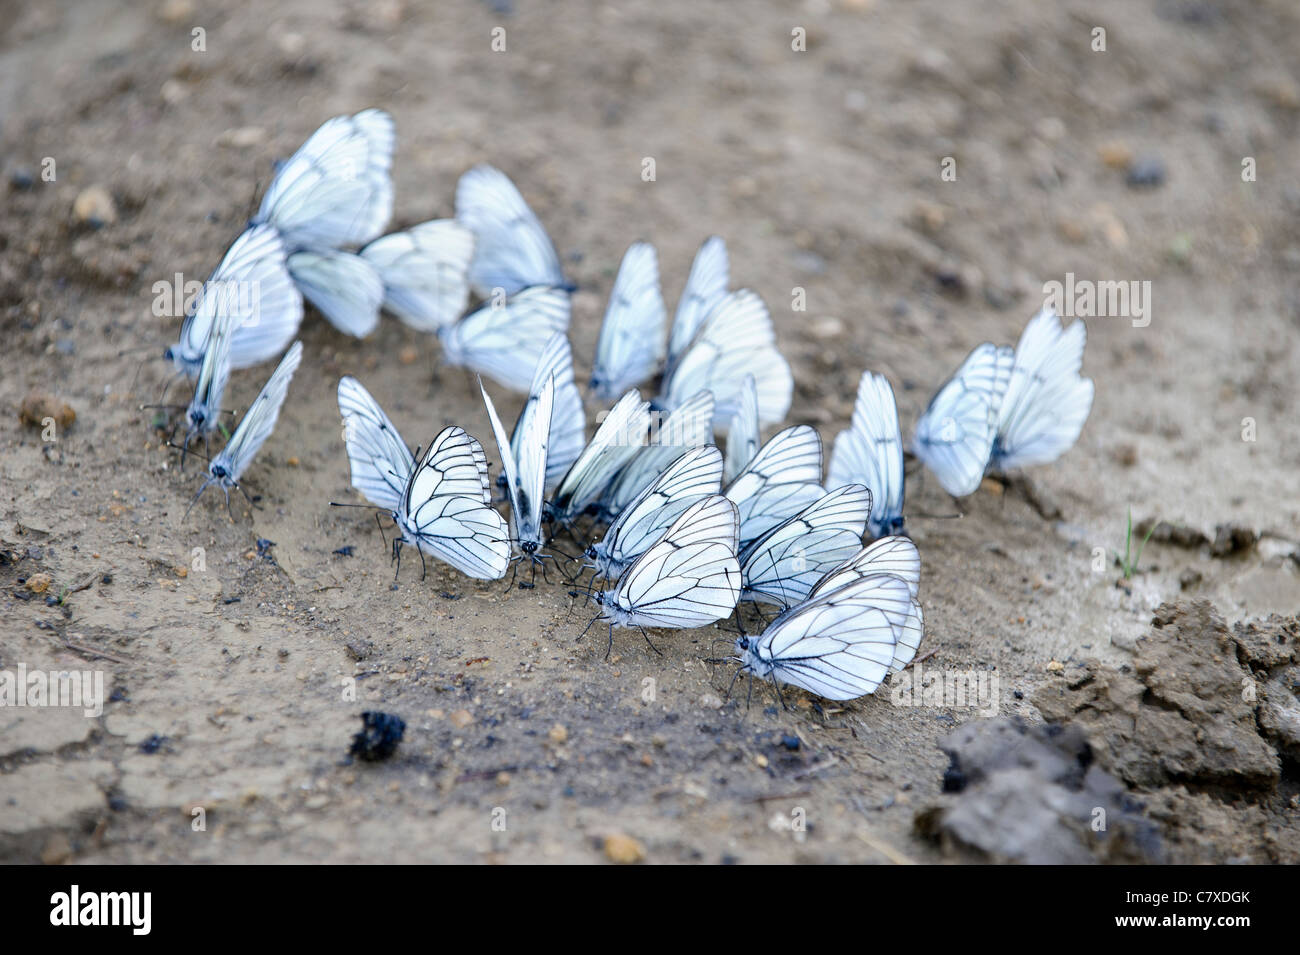 Group of butterflies sits on ground Stock Photo